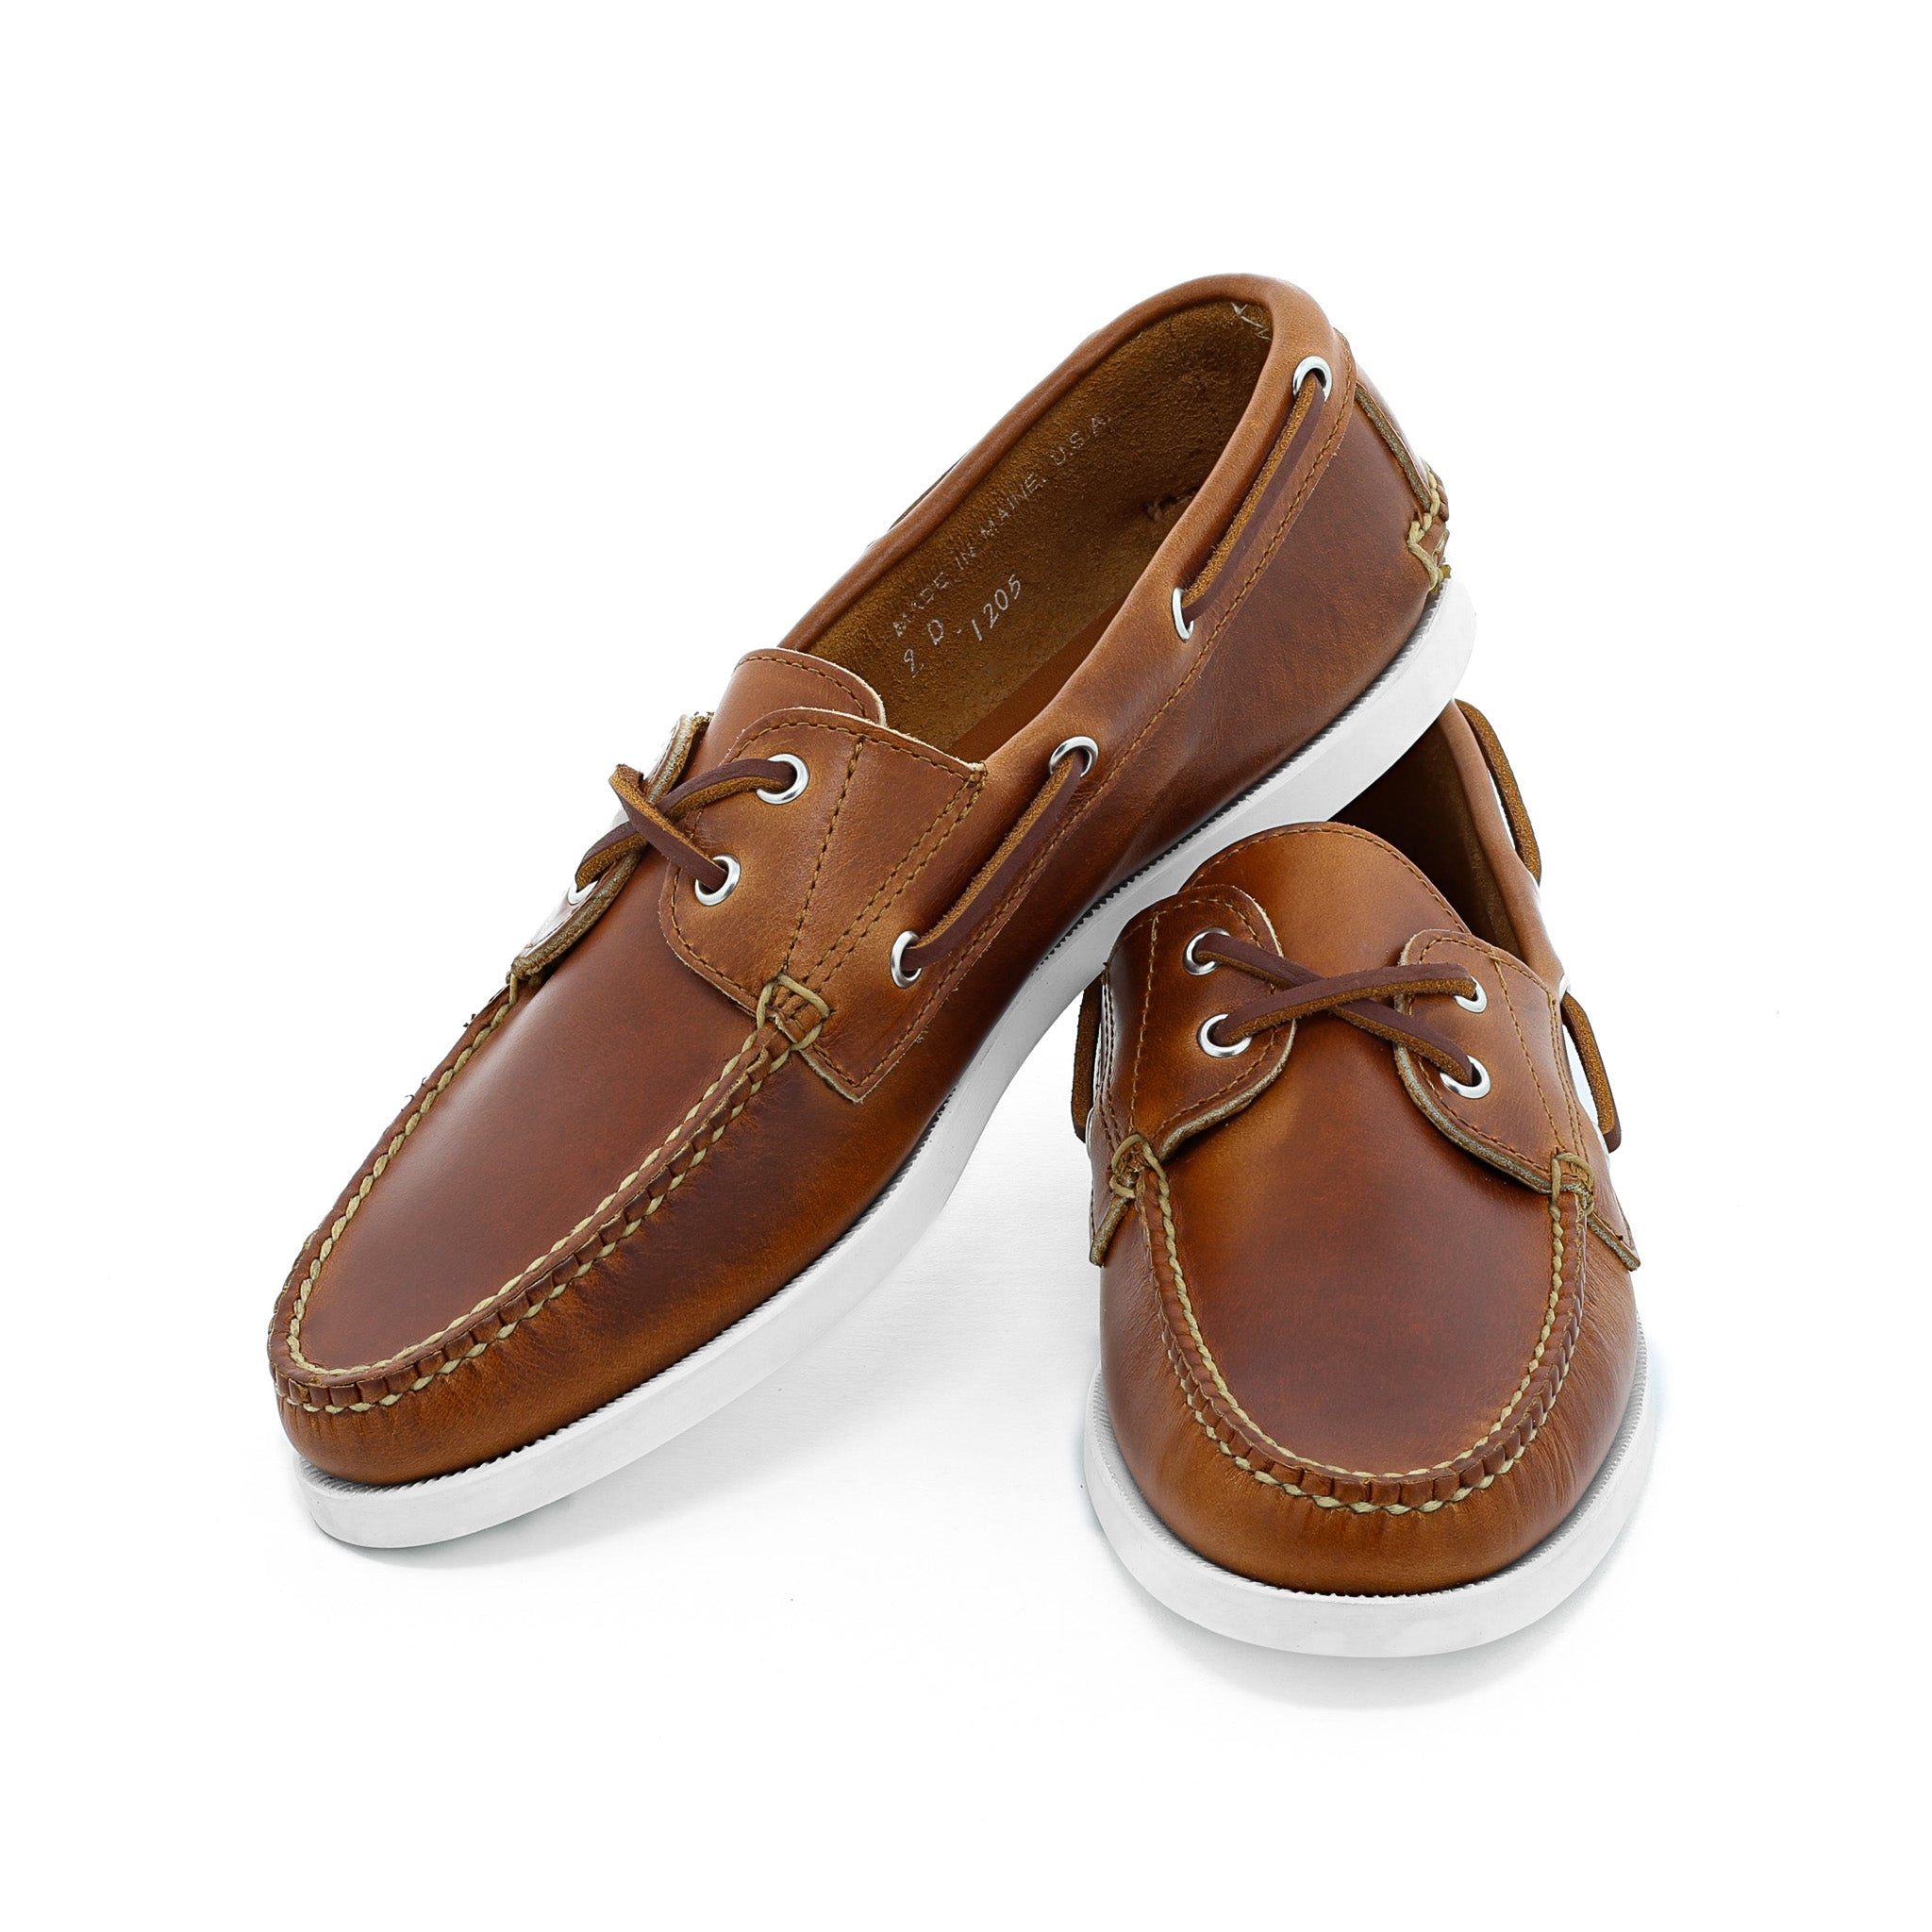 Styling Leather Boat Shoes for Casual Outfits